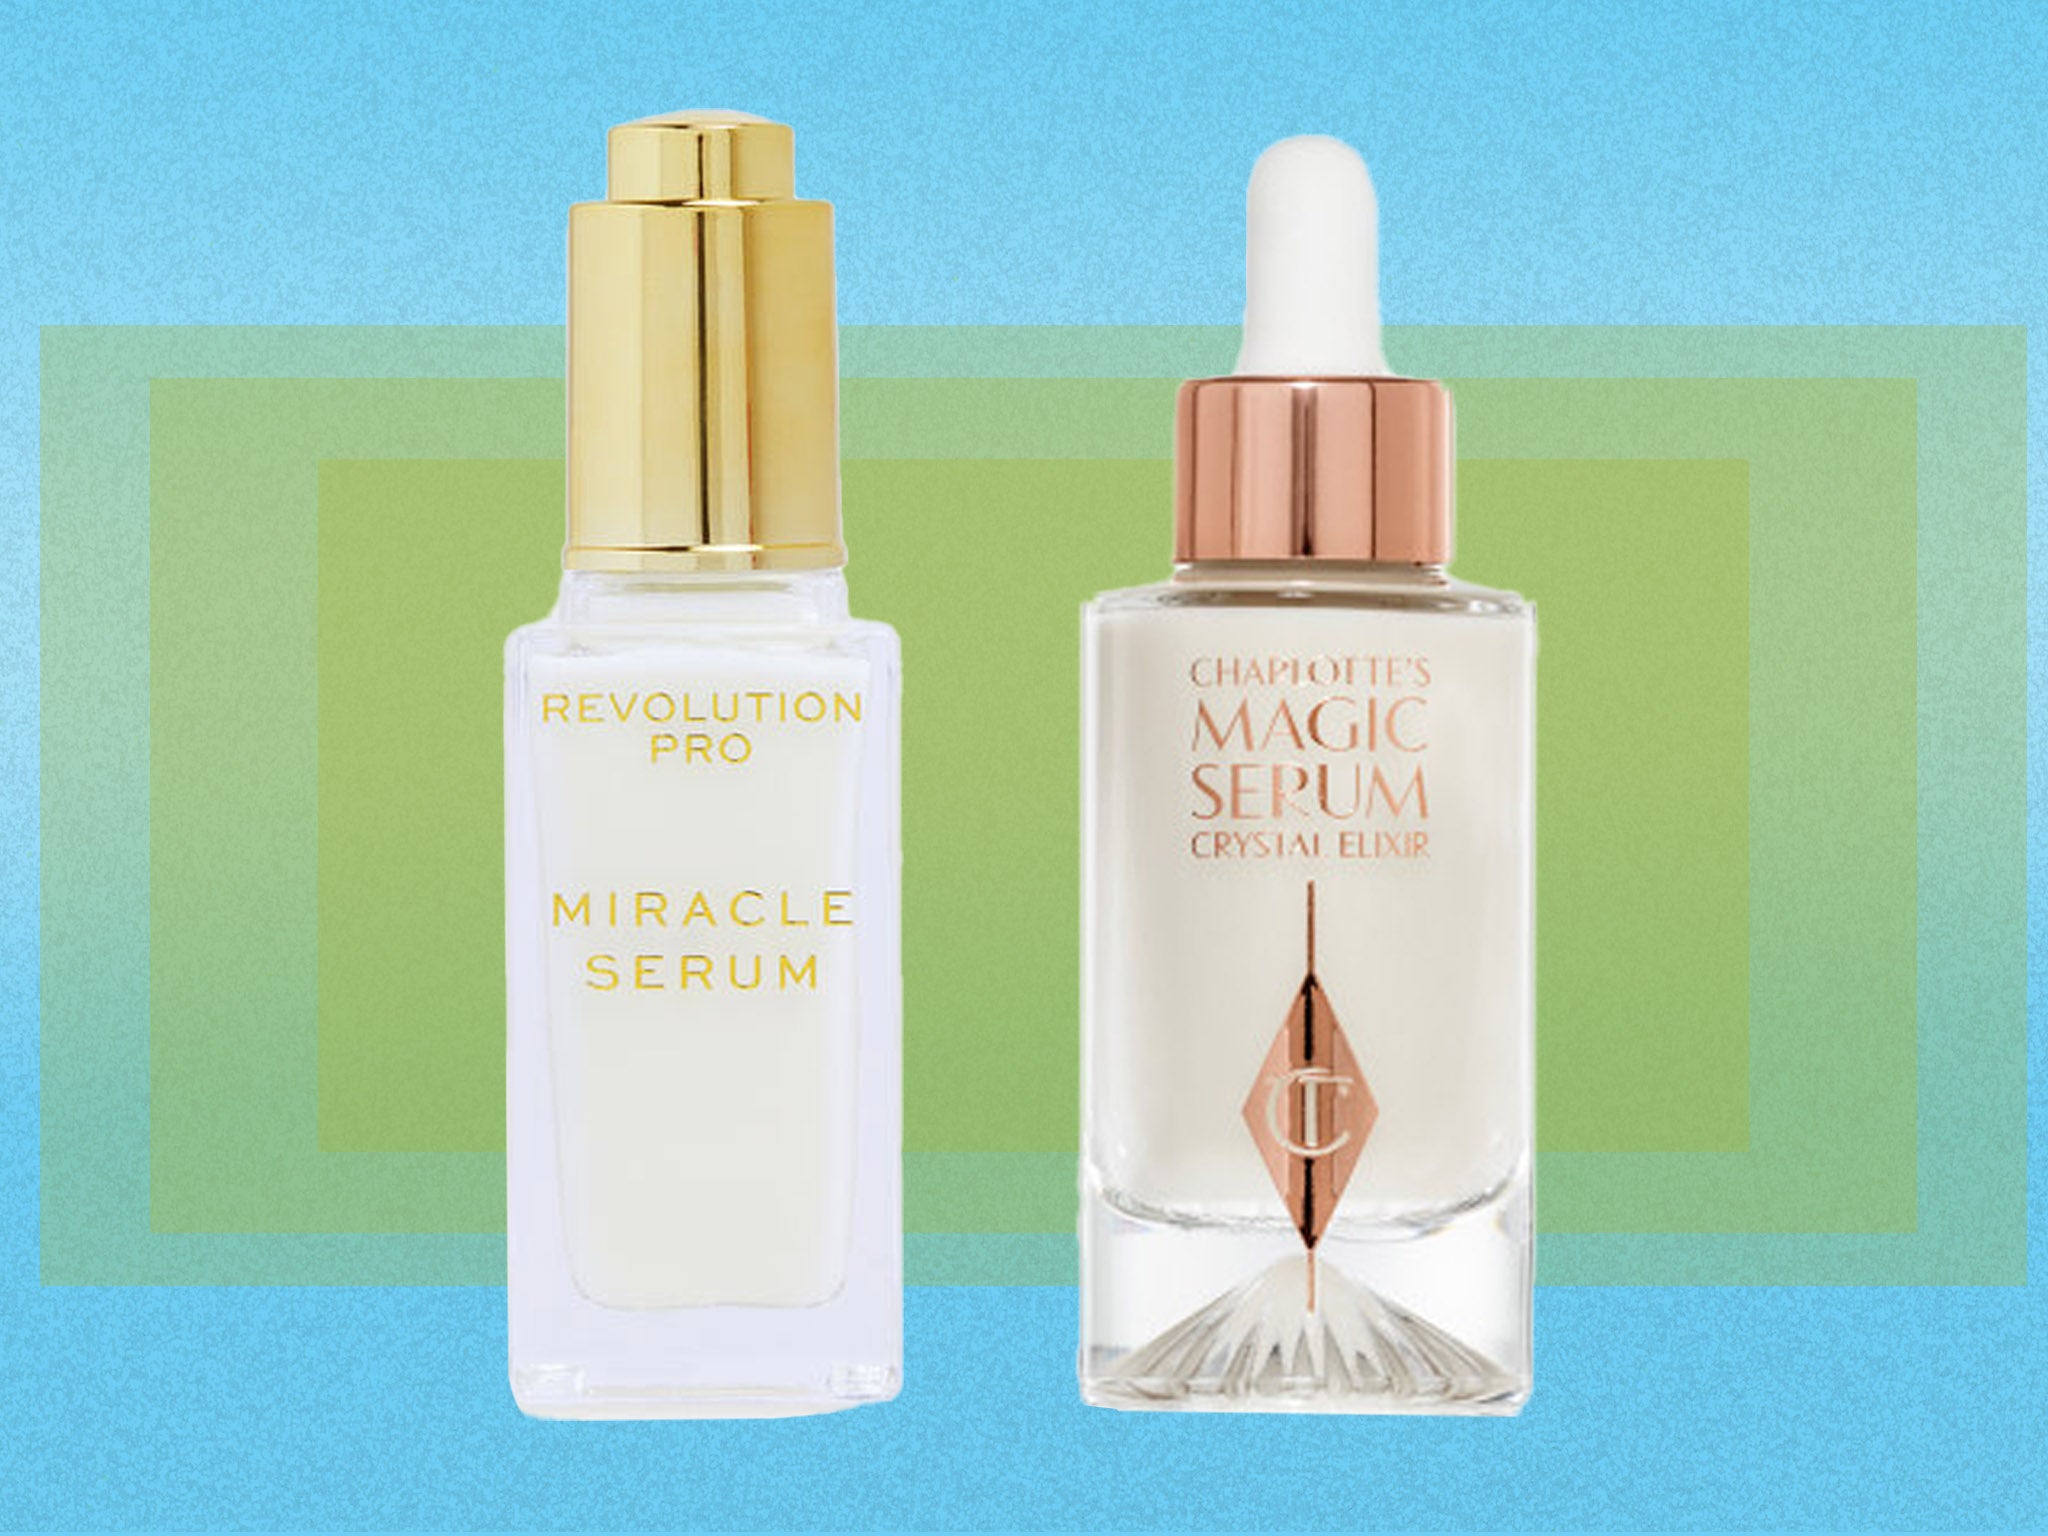 Revolution has launched a £10 alternative to Charlotte Tilbury’s £65 magic serum